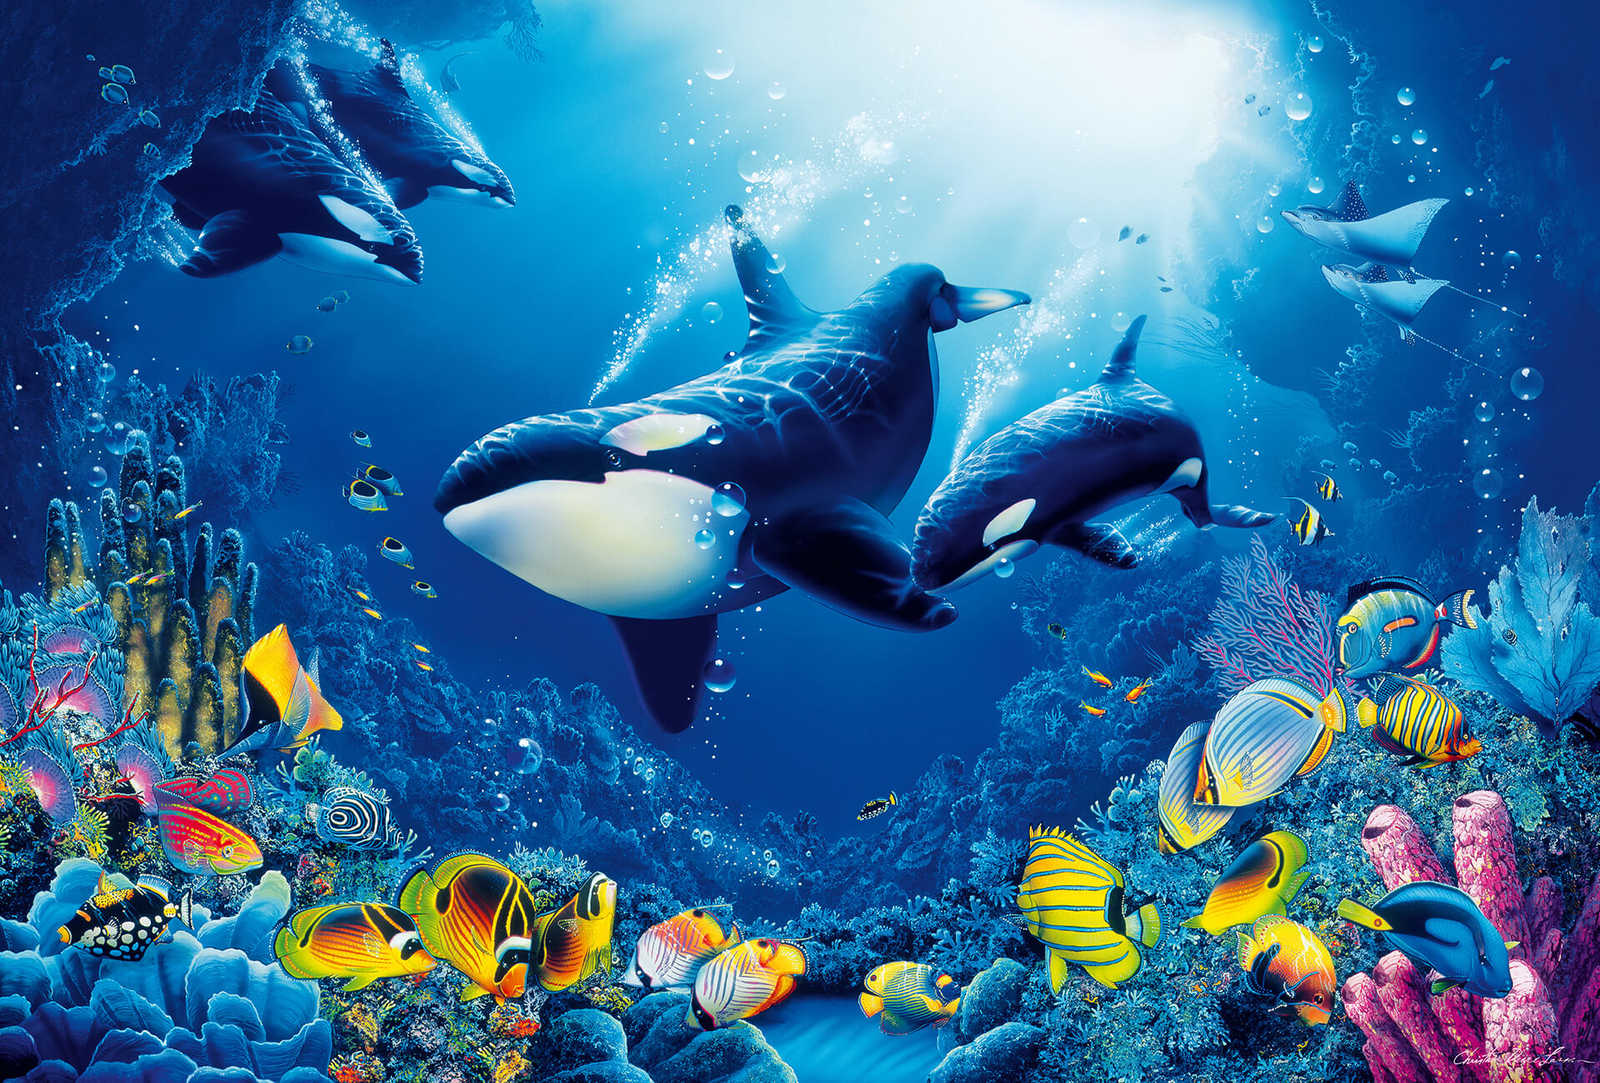         Underwater wall mural Whales, Corals & Fishes
    